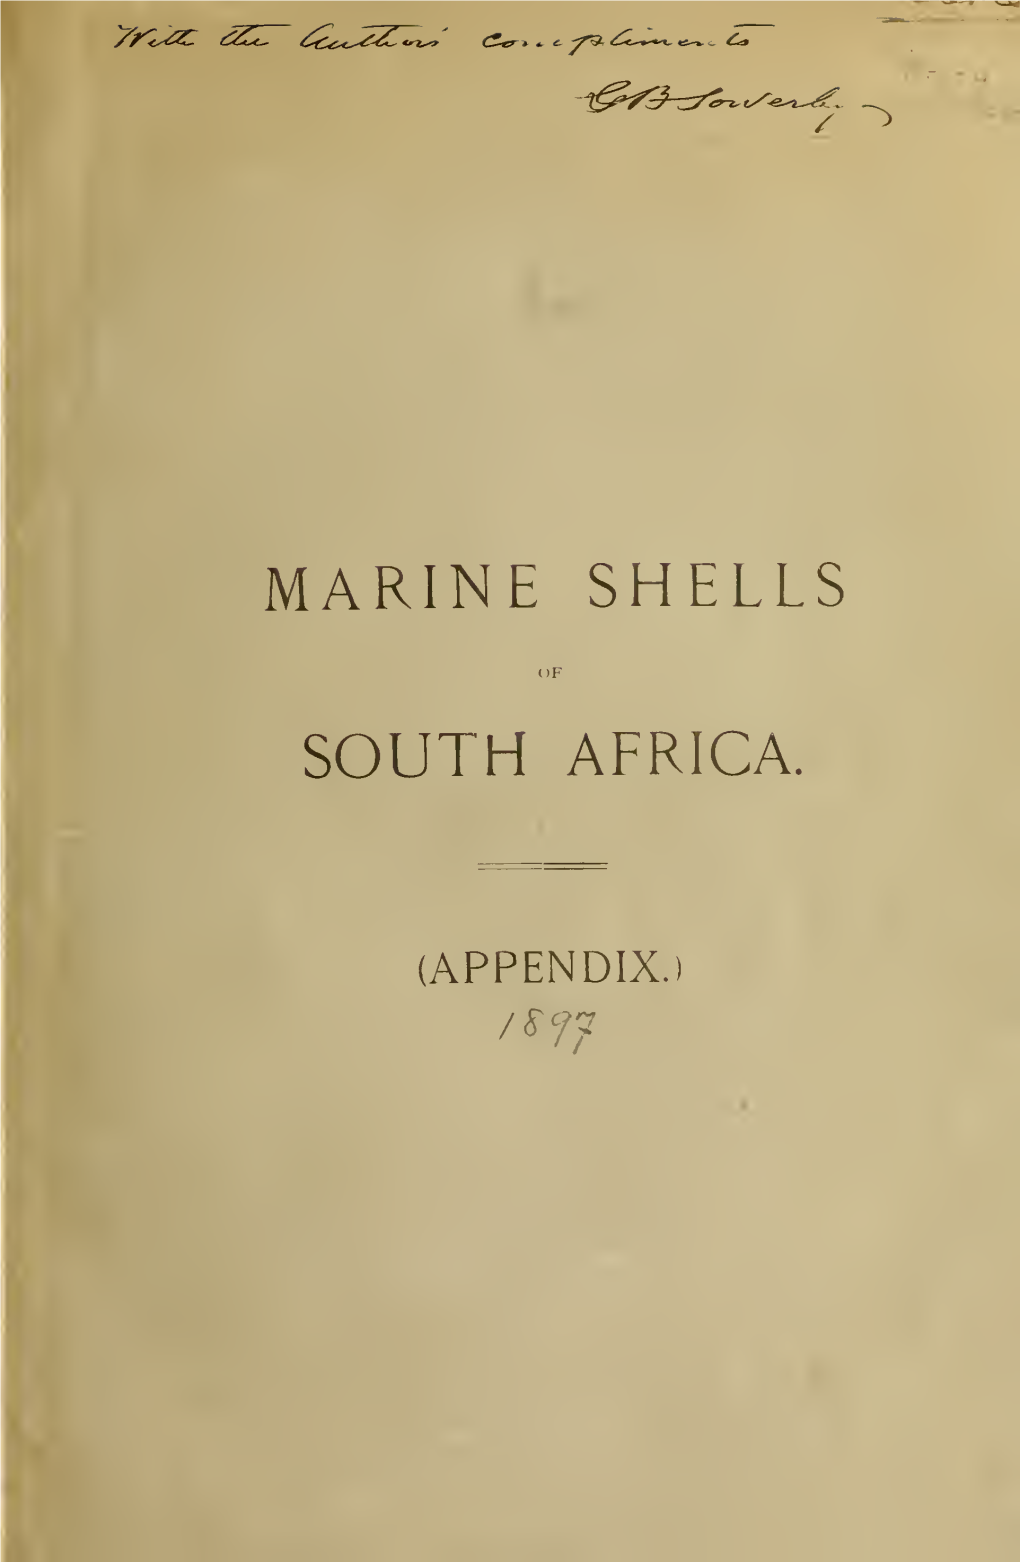 Appendix to Marine Shells of South Africa : a Catalogue of All the Known